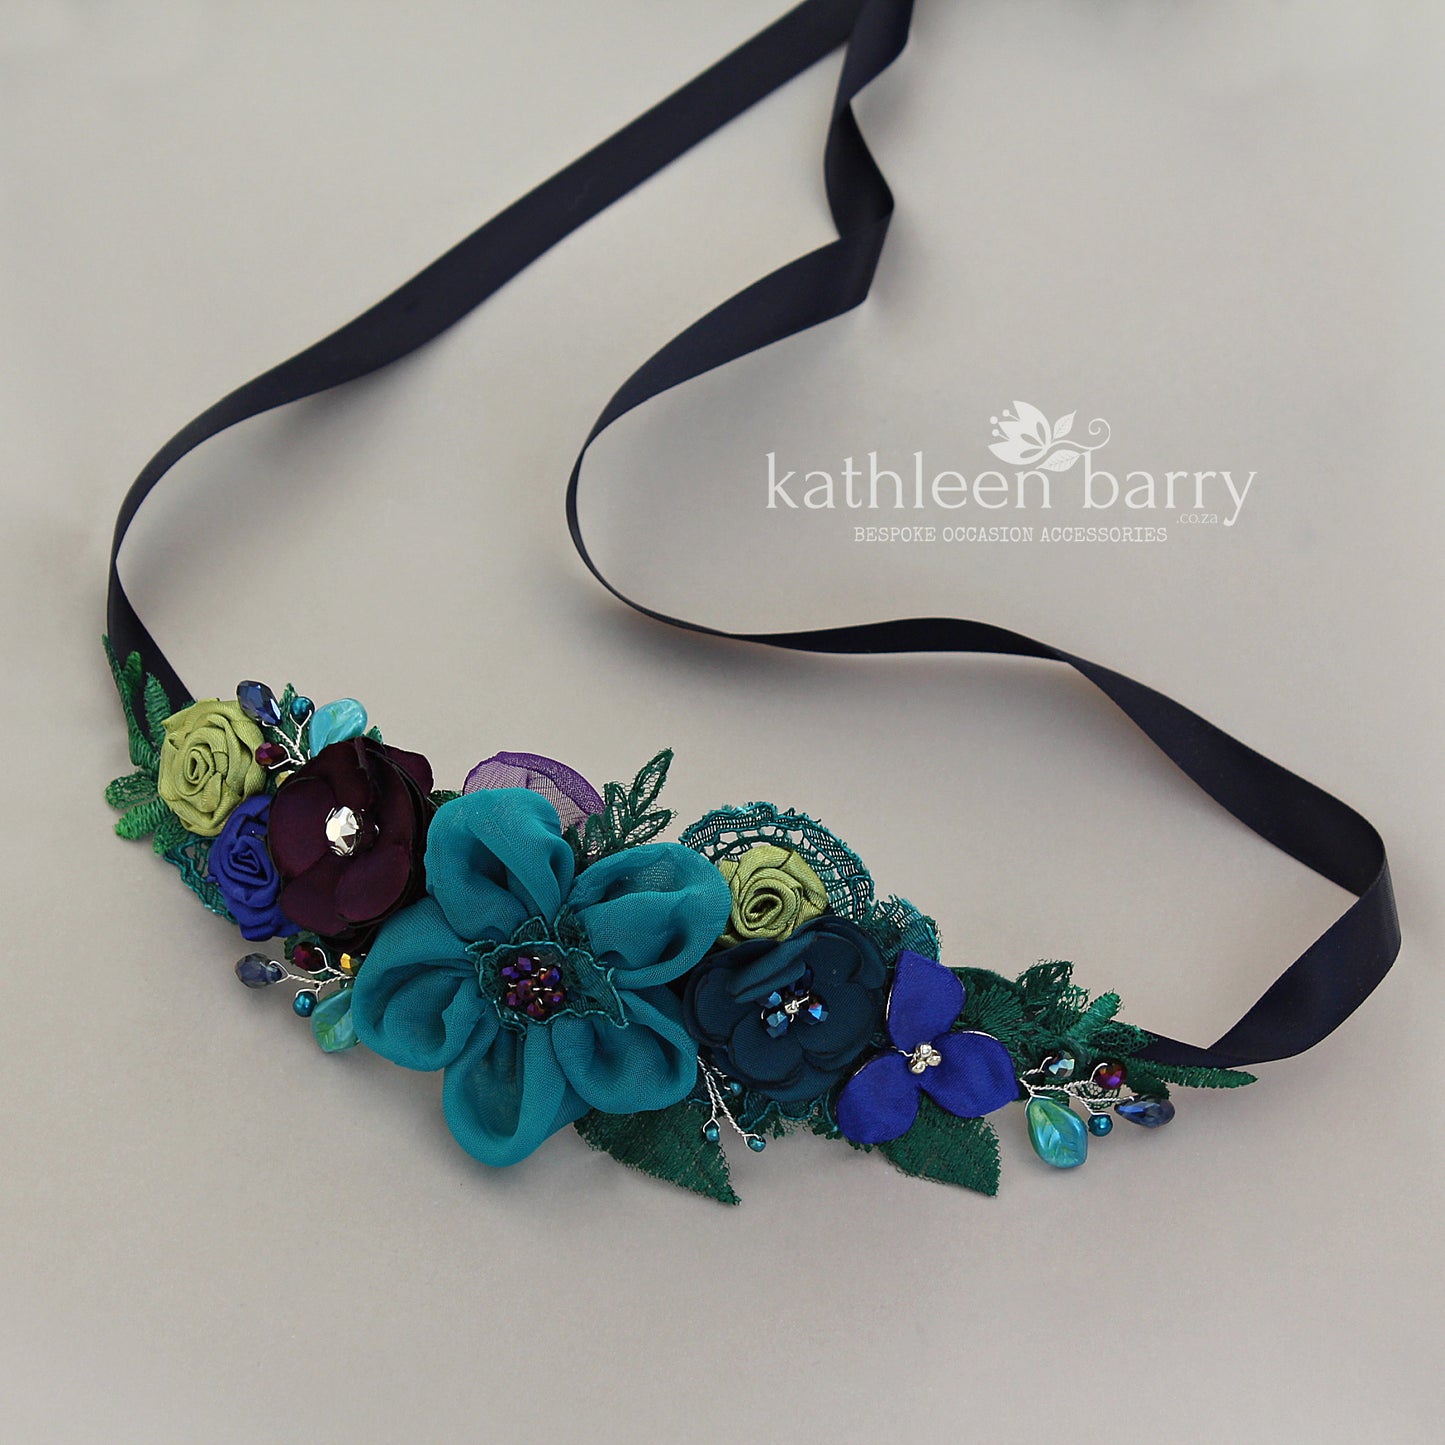 Peacock Wedding dress sash belt - floral with lace - Teal, indigo, emerald green, Ivory and cream - custom colors available